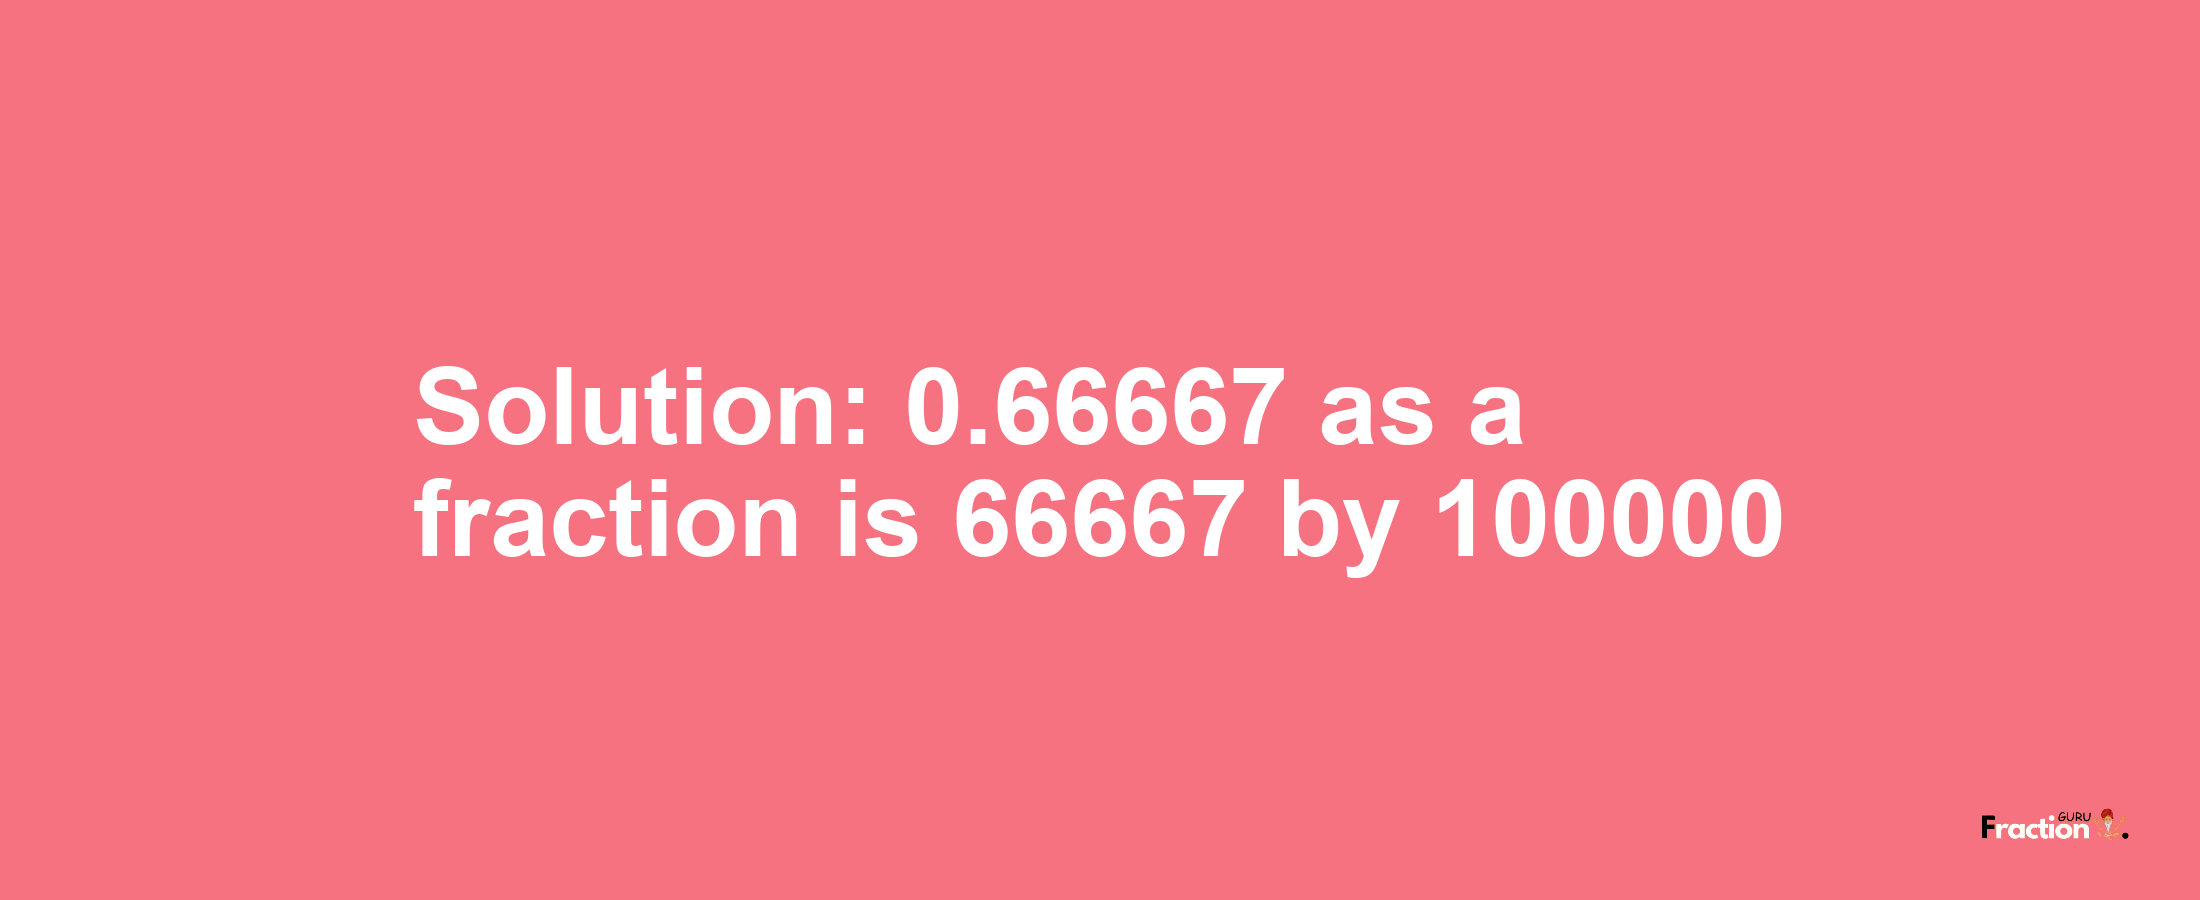 Solution:0.66667 as a fraction is 66667/100000